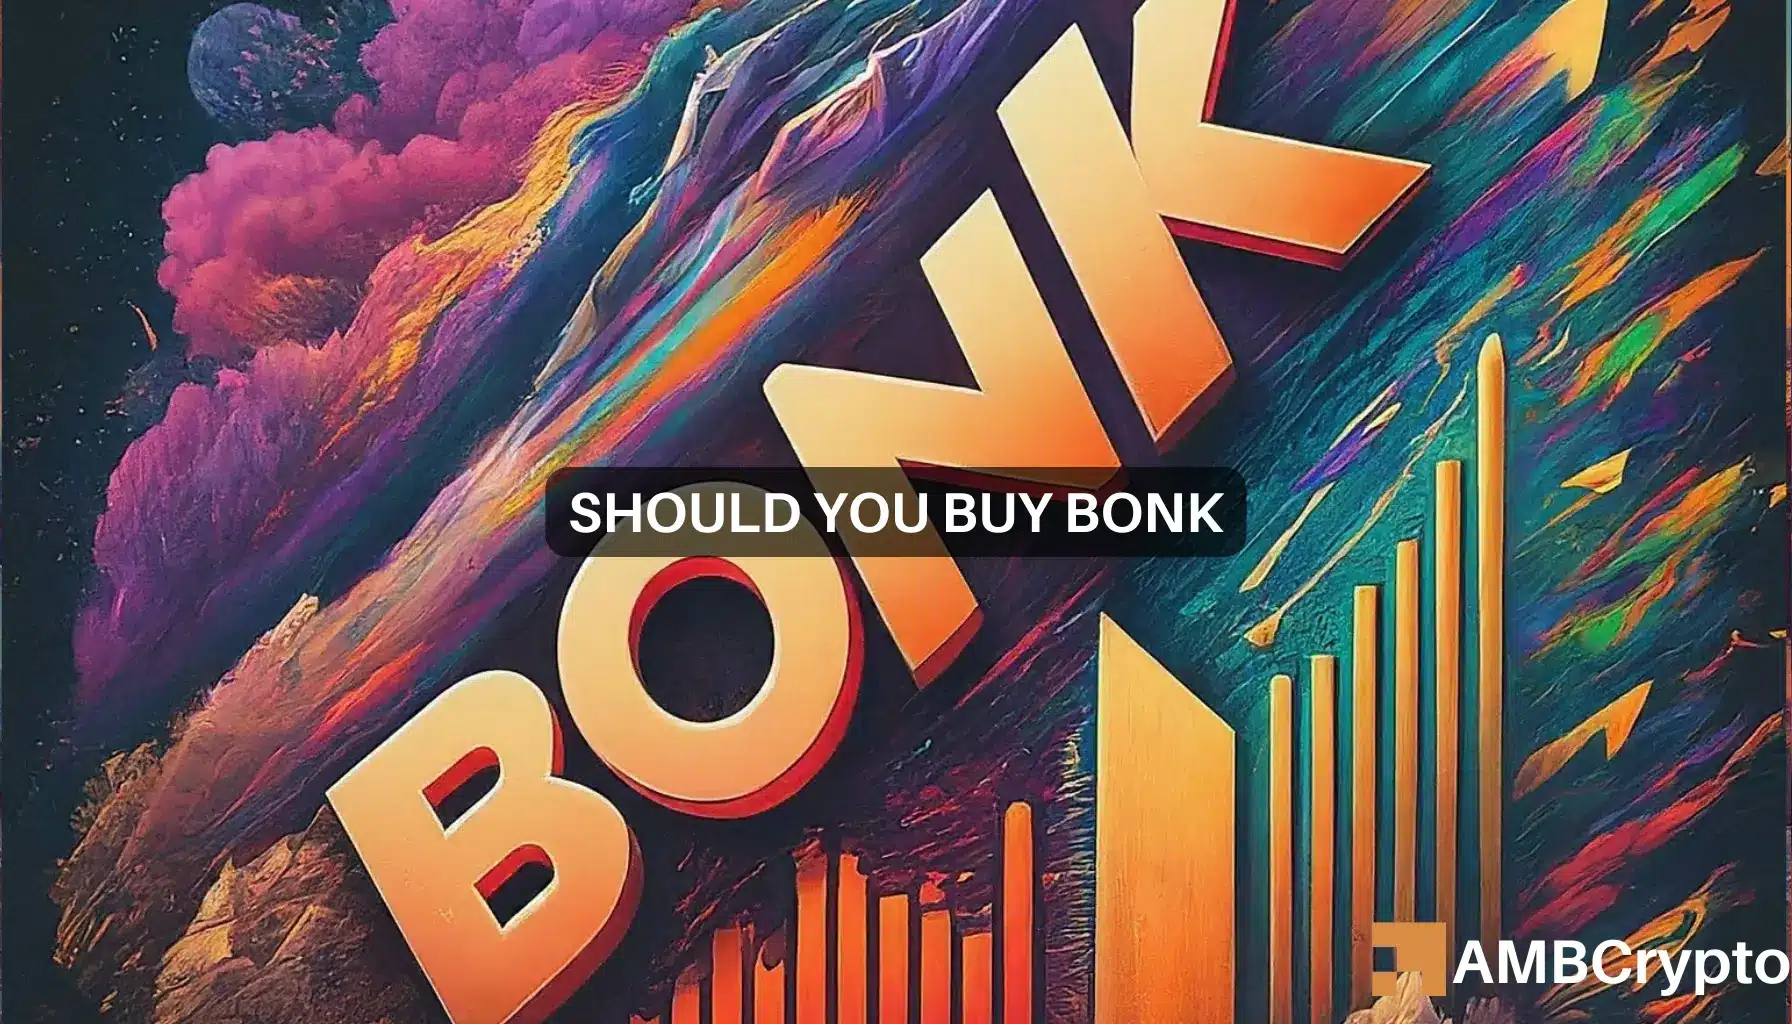 BONK market cap surges past $2B, but traders need to be careful